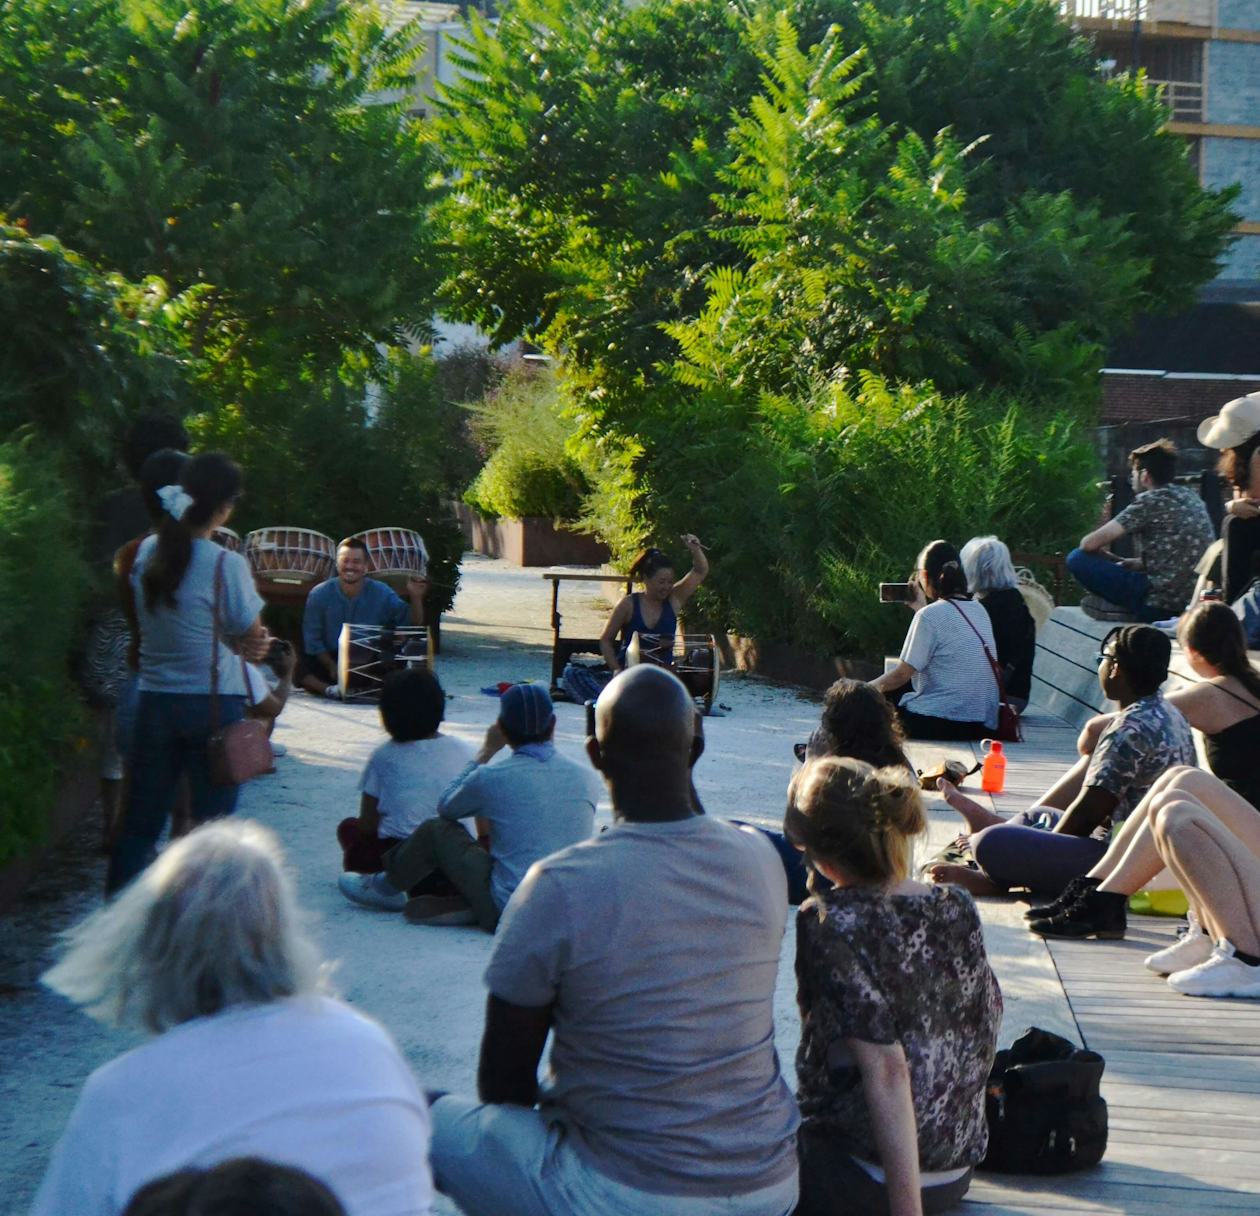 People watch a drum performance at the Rail Park